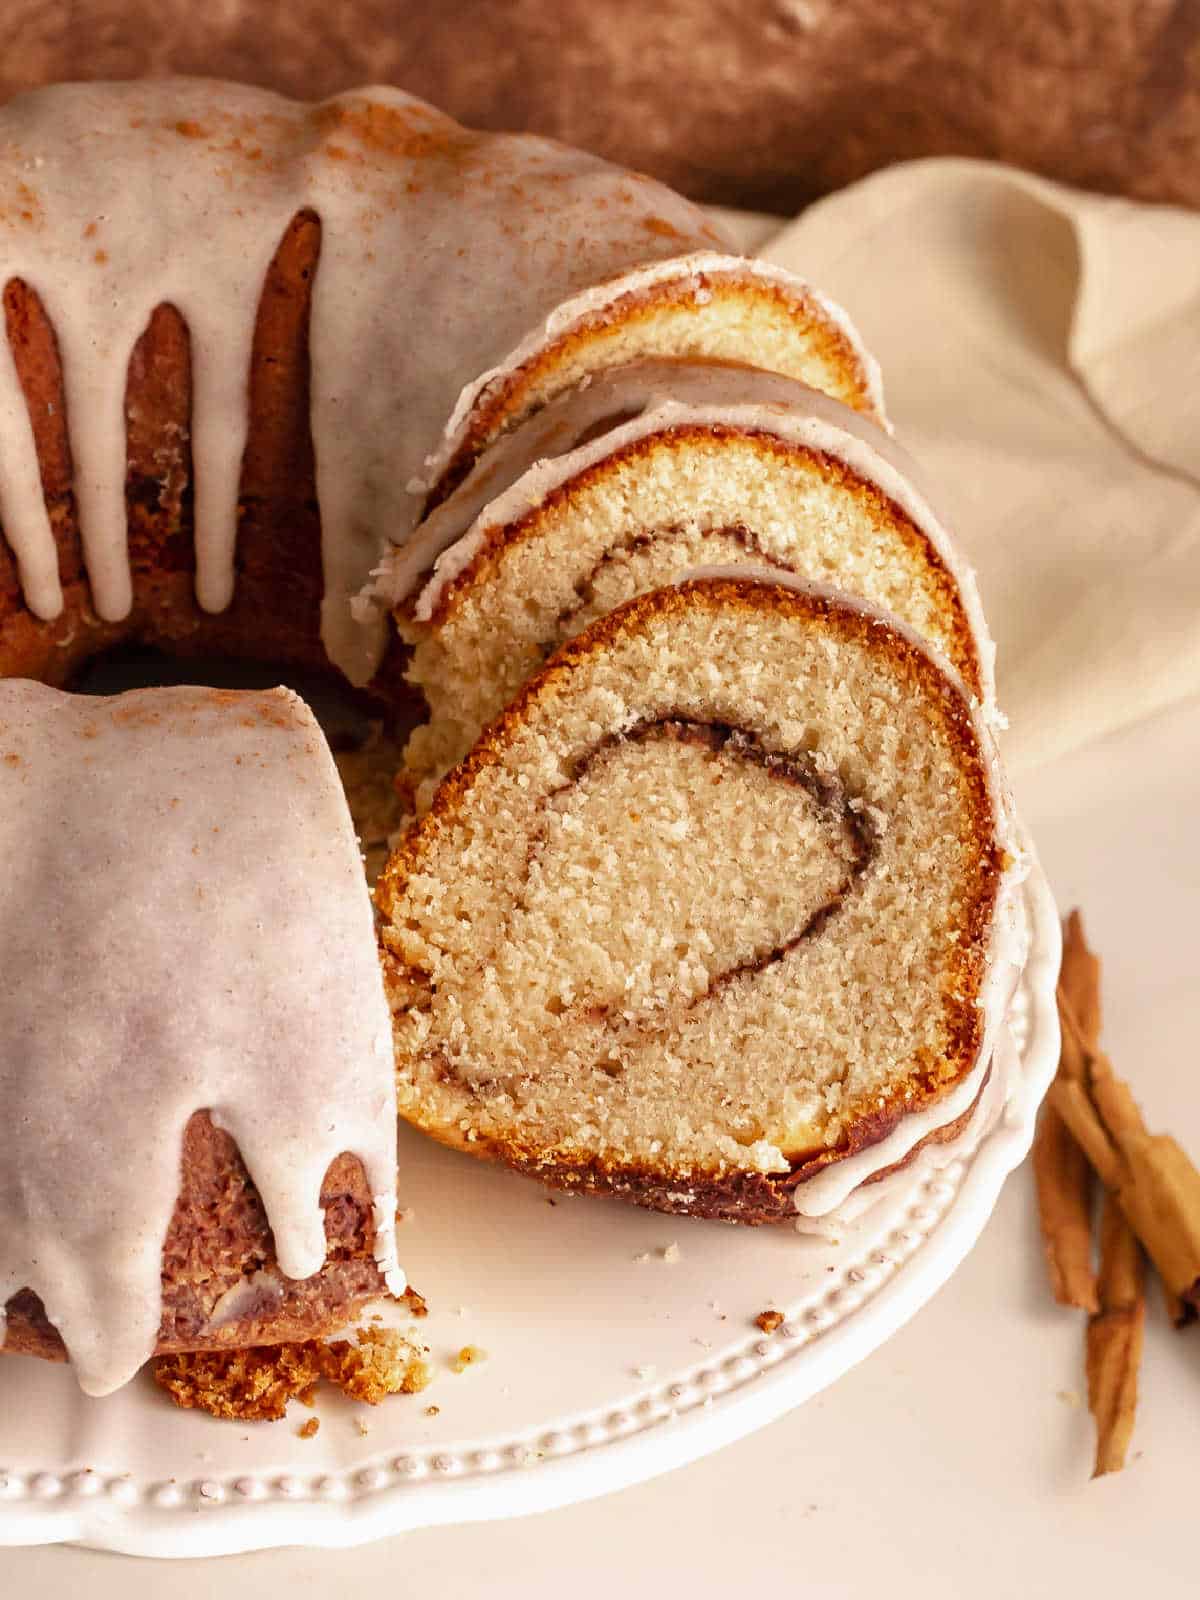 Several slices of glazed cinnamon swirl bundt cake on a white cake stand with rest of the cake.